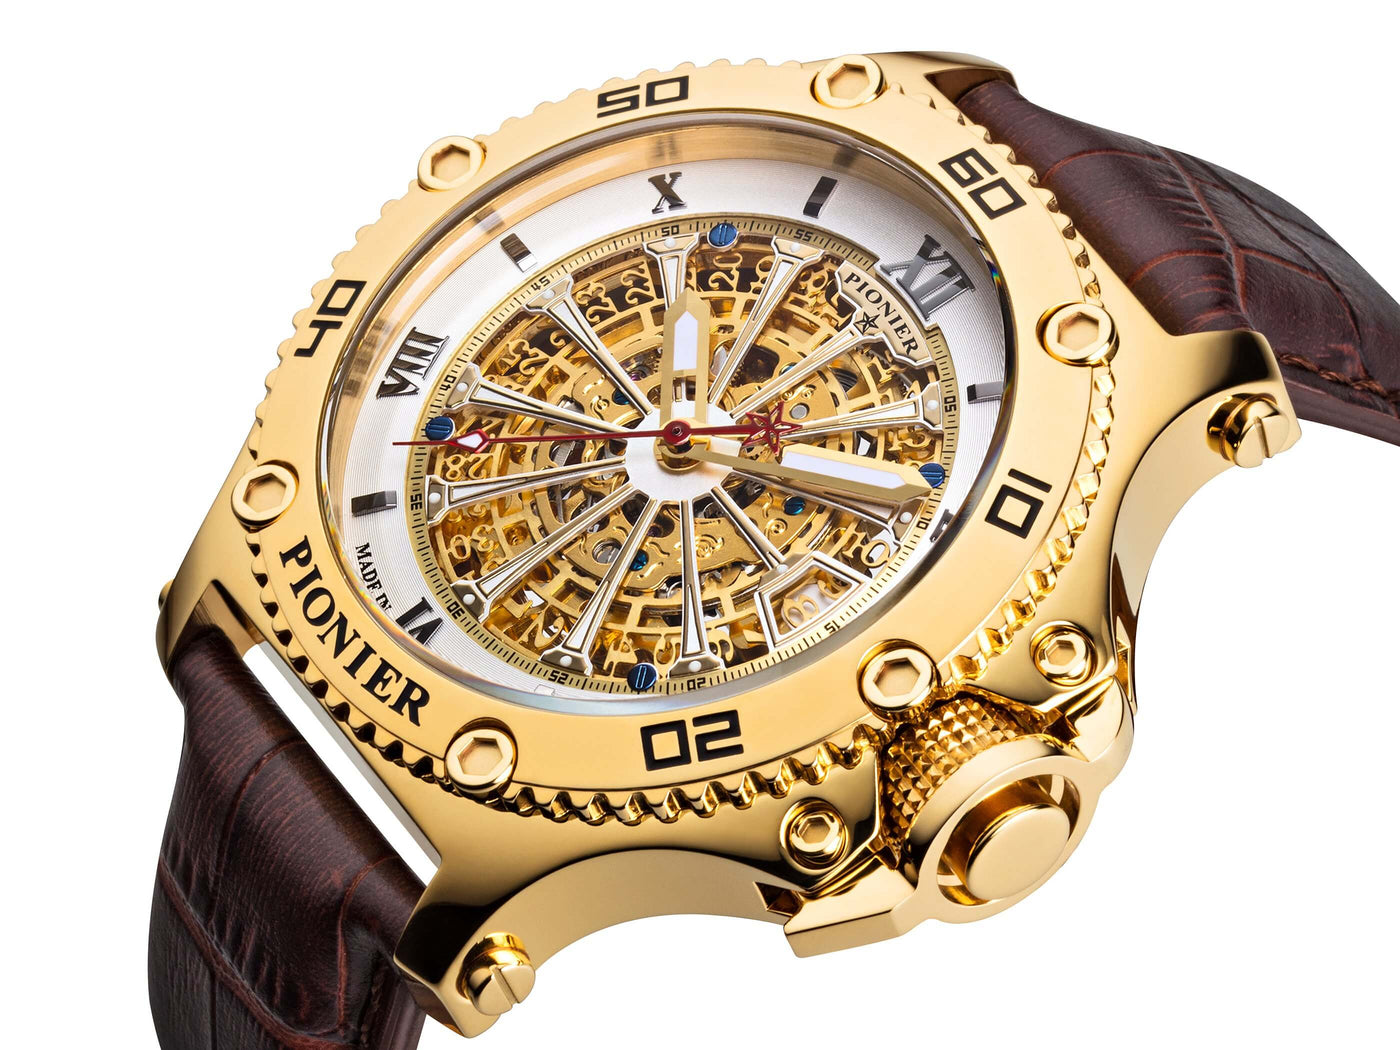 Arabic and Roman numerals mixed with a date function and gold color crown.